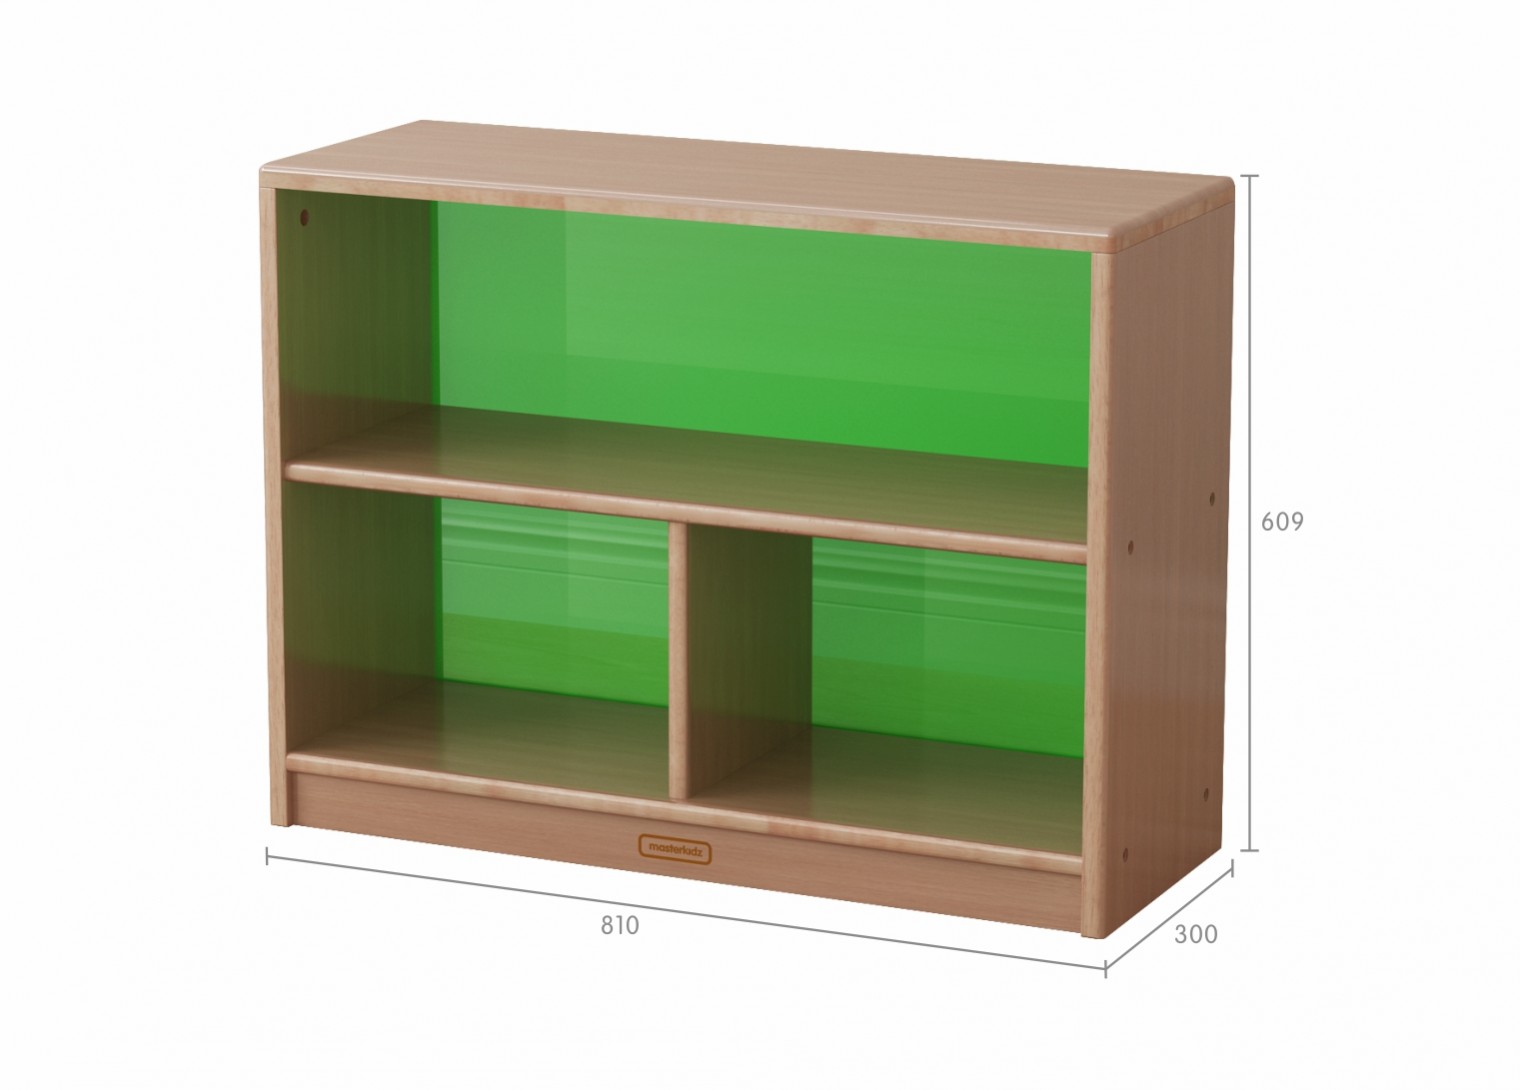 Forest School - 609H x 810L Wooden  3-Compartment Shelving Unit - Translucent Green Back